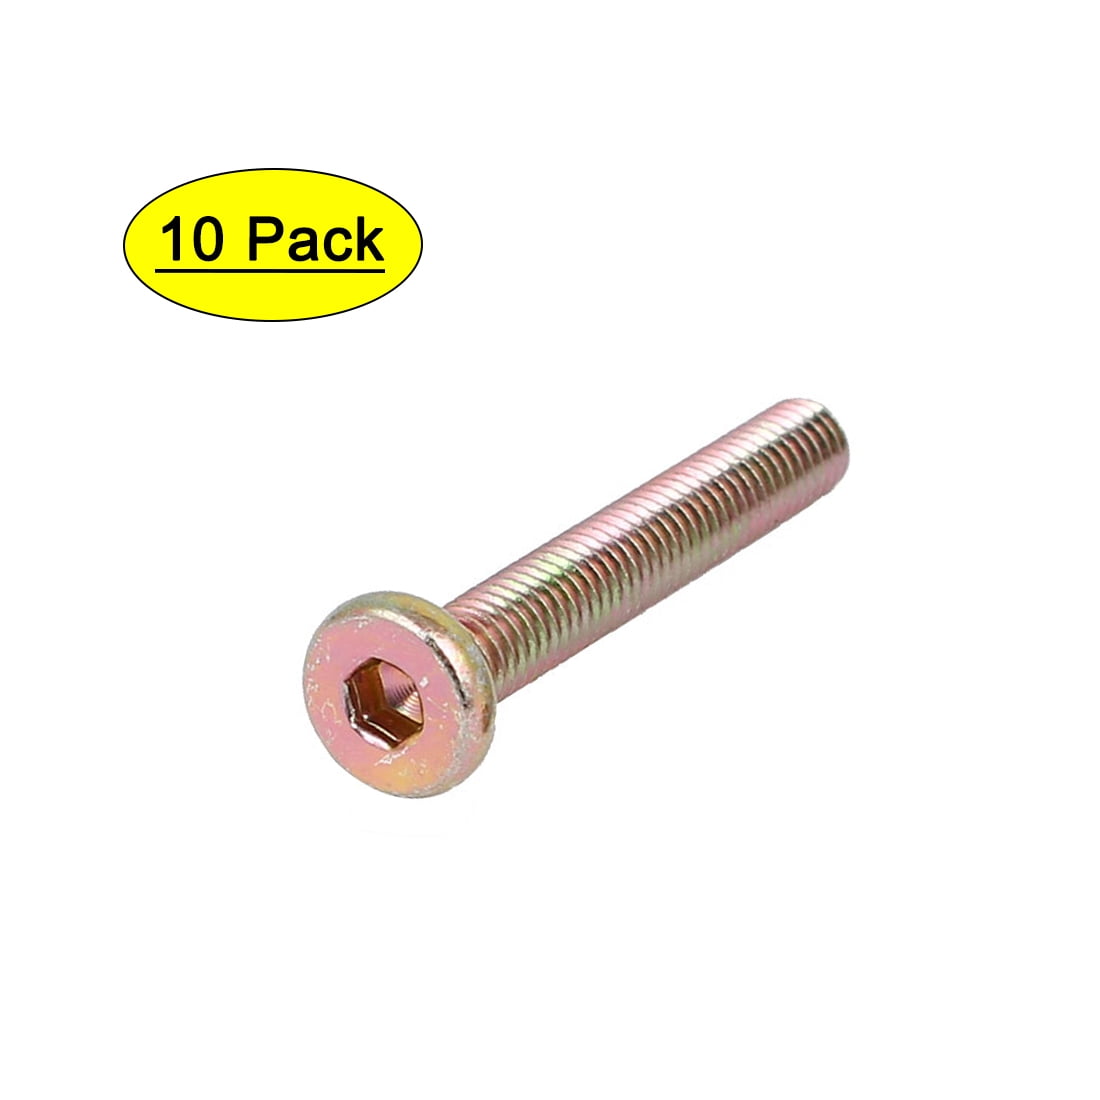 countersunk slot bolt bolts screw Machine screws with nuts M6 x 40 pack of 10